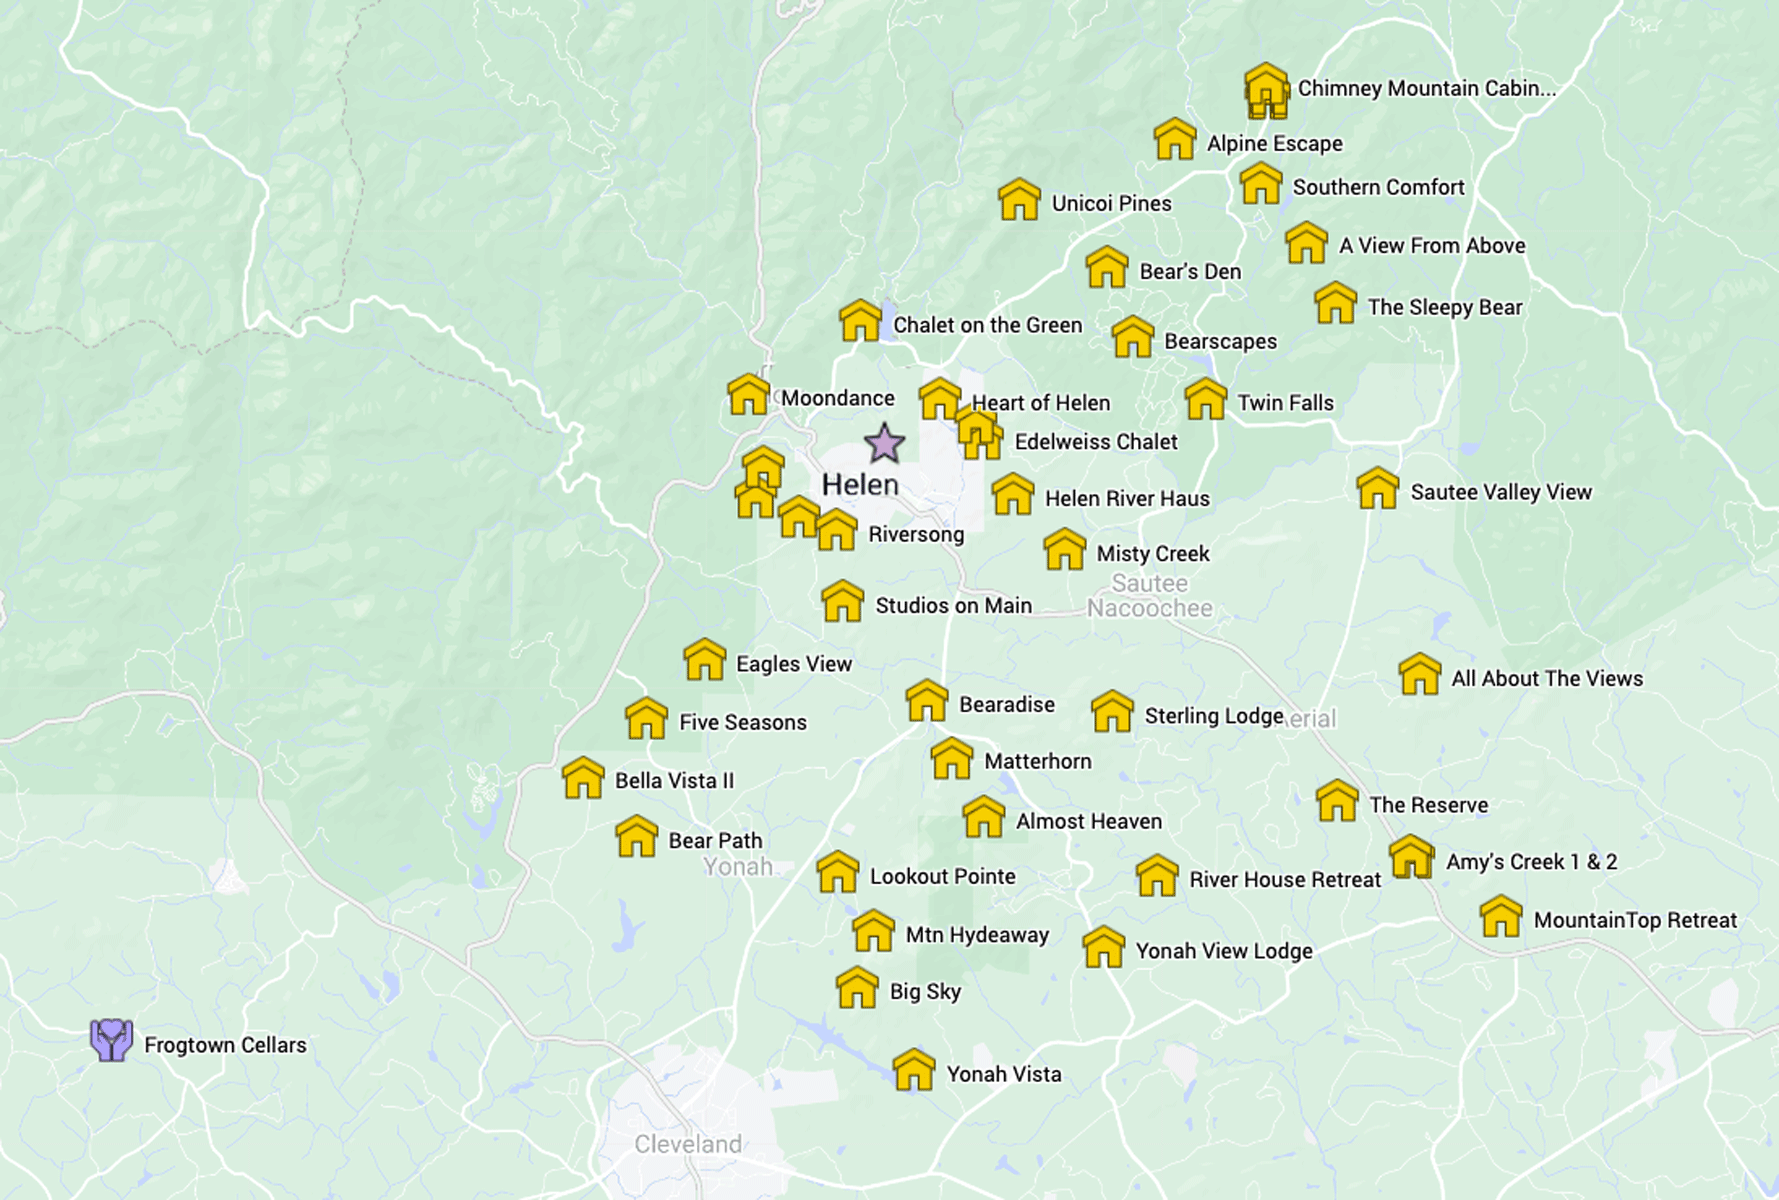 A map of Frogtown Cellars and nearby cabins.